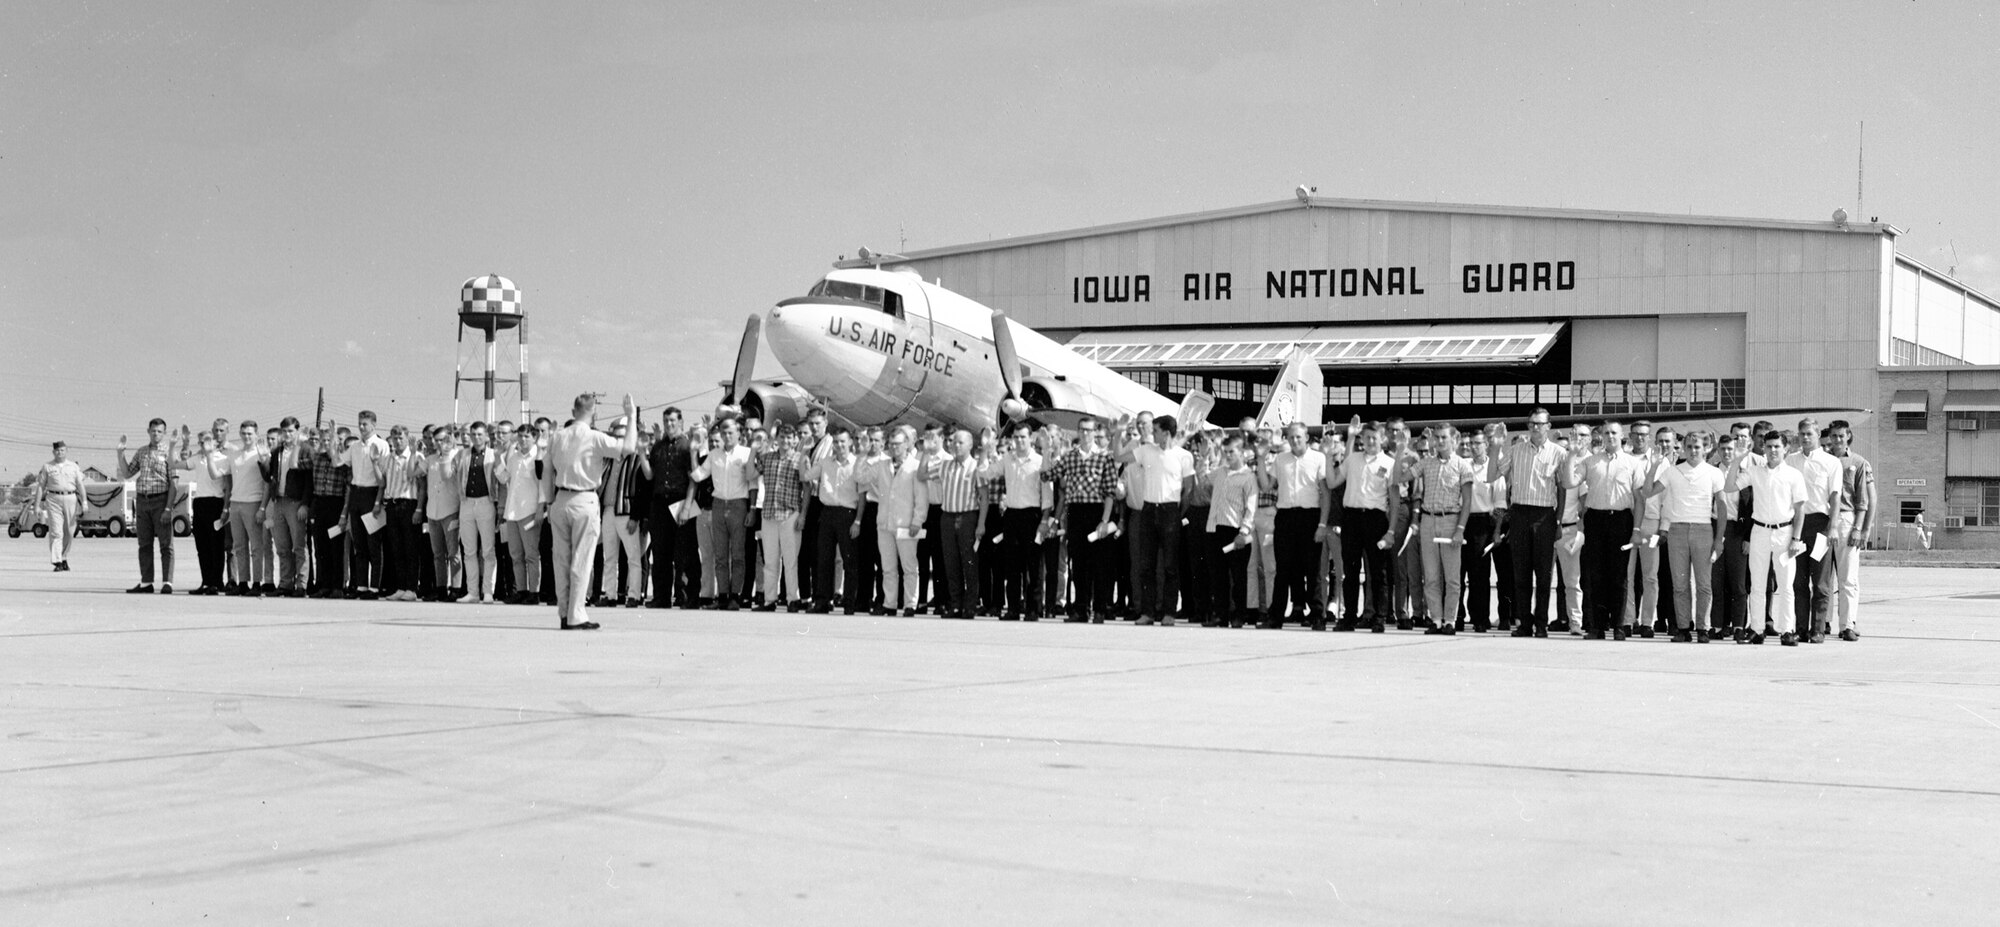 Maj. LeRoy A. Wagner, 185th Tactical Fighter Group, Sioux City, Iowa is shown swearing in 146 new Air Guardsmen at the Sioux City Air Base, on 28 August 1965. (U.S. Air National Guard photo by SSgt. Duane McCullum/Released)